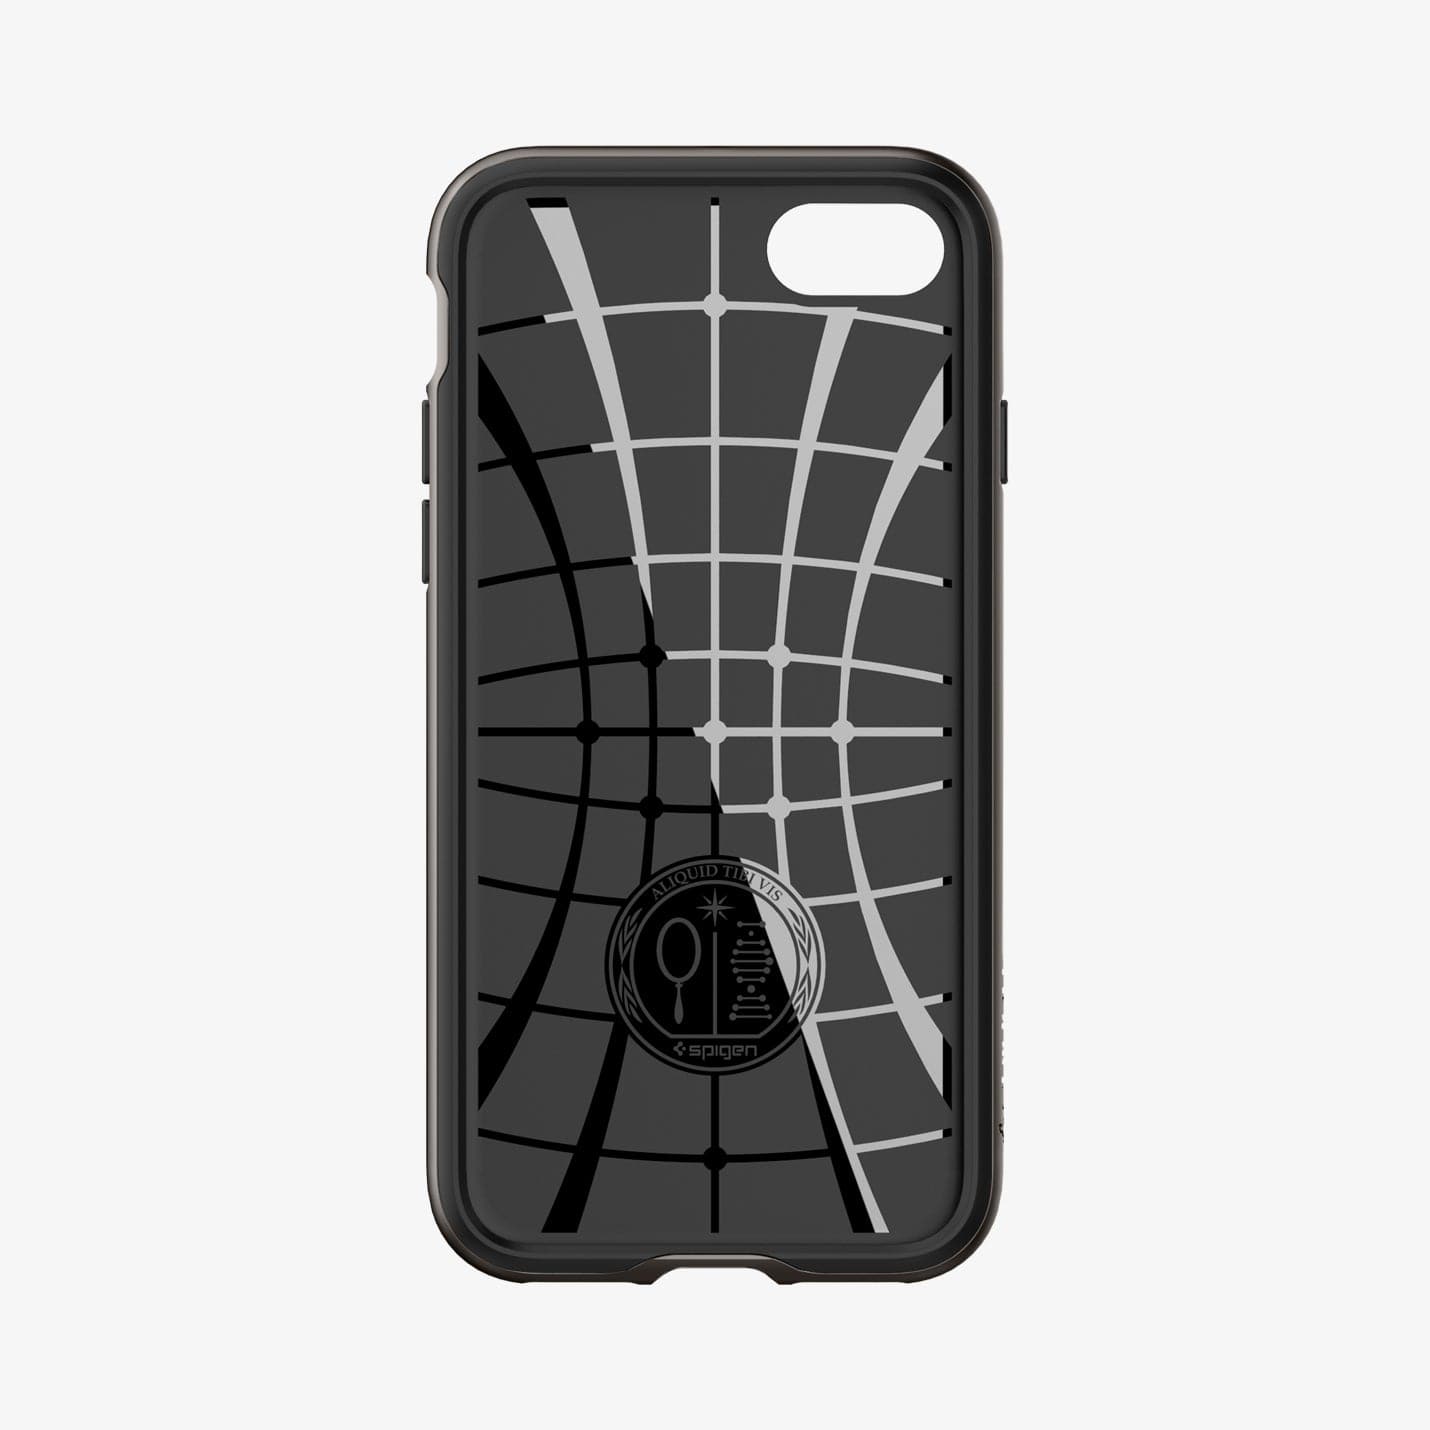 054CS22358 - iPhone 7 Series Neo Hybrid Case in Gunmetal showing the inner case with spider web pattern